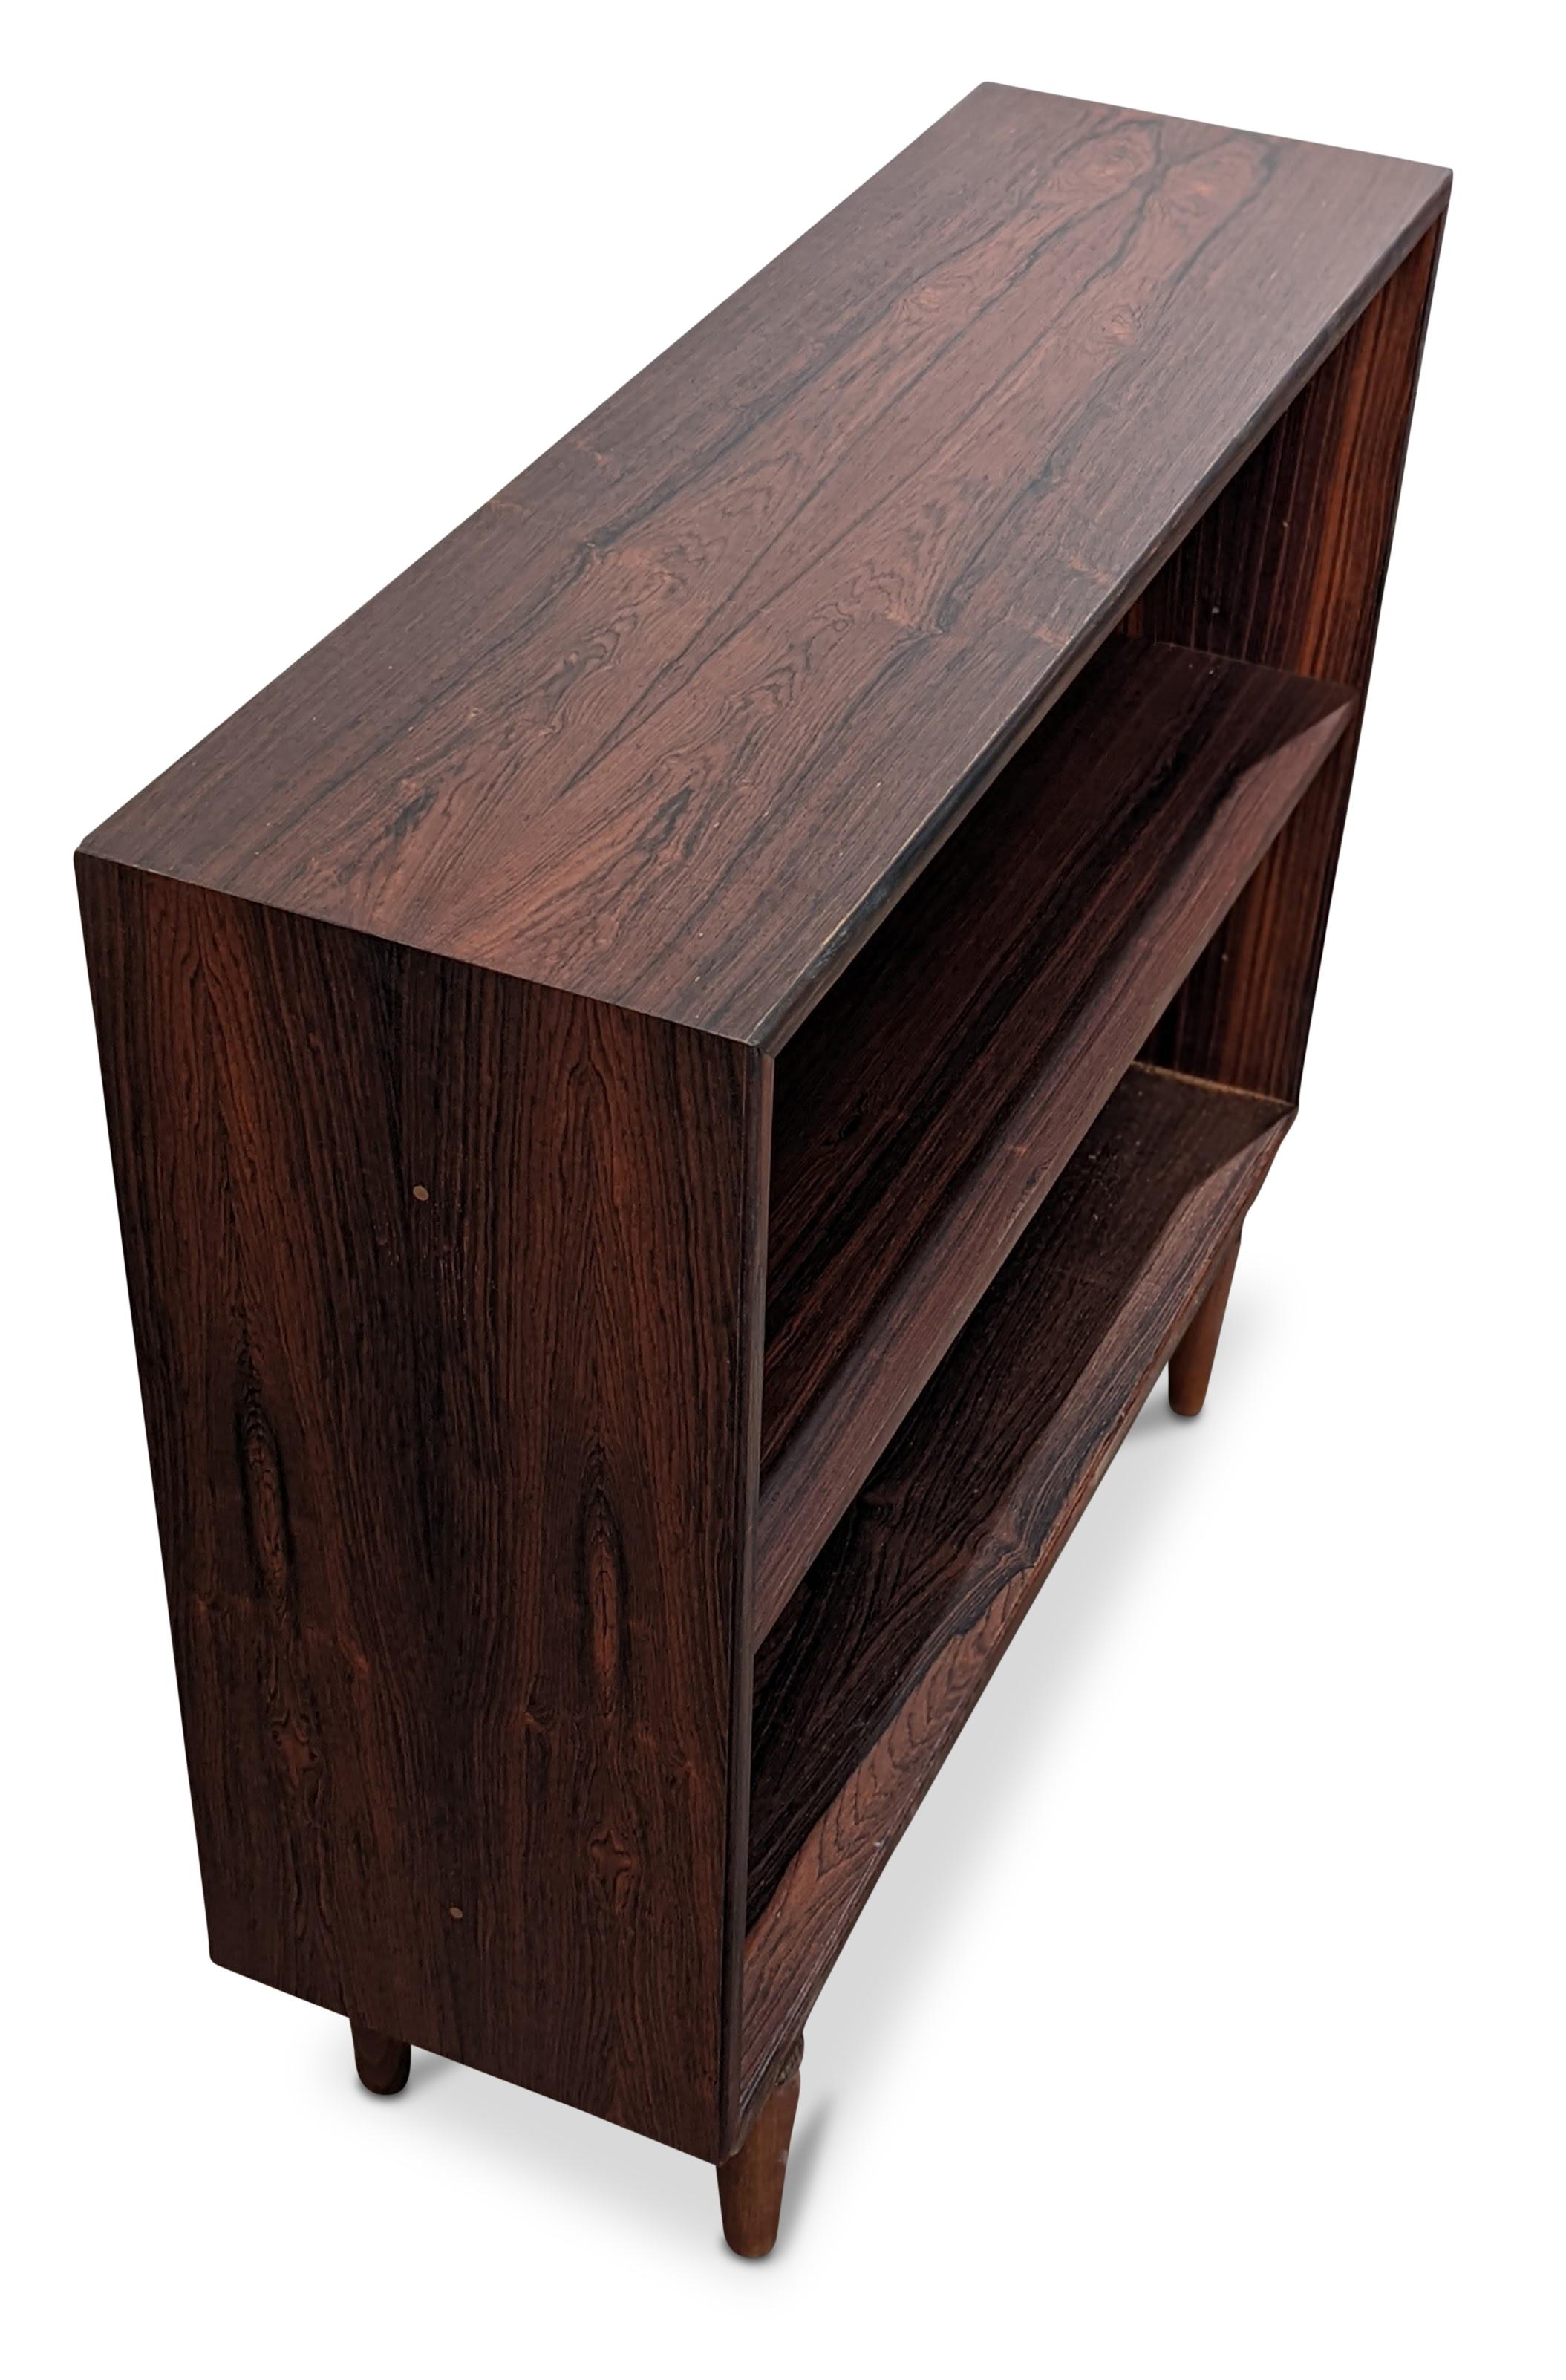 Vintage Danish Mid-Century Modern, made in the 1950's - Recently refurbished

Brazilian rosewood have been illegal to harvest since 1961 and on the U.N. CITES list of endangered spices since 1992. For each piece of rosewood furniture we import to